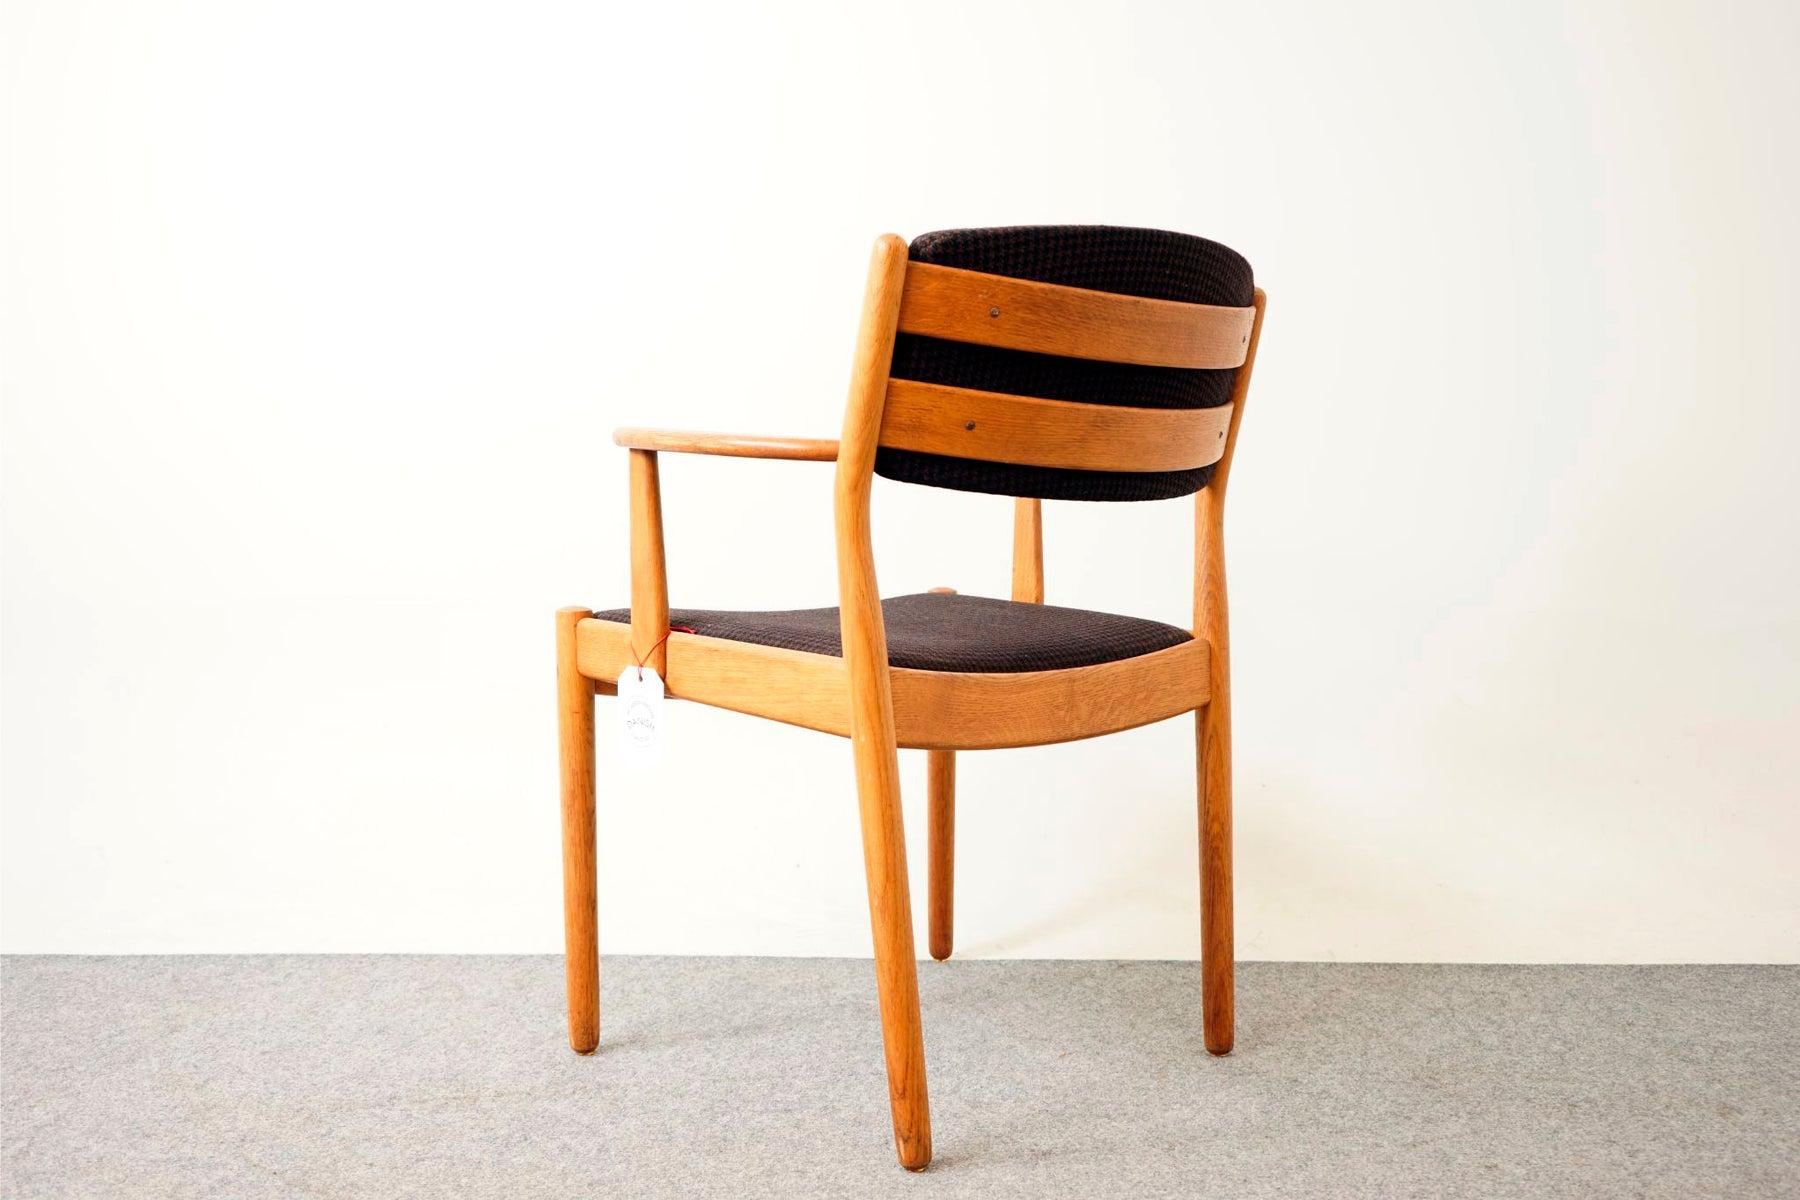 Scandinavian Mid-Century Modern Oak Arm Chair by Poul Volther for FDB 1